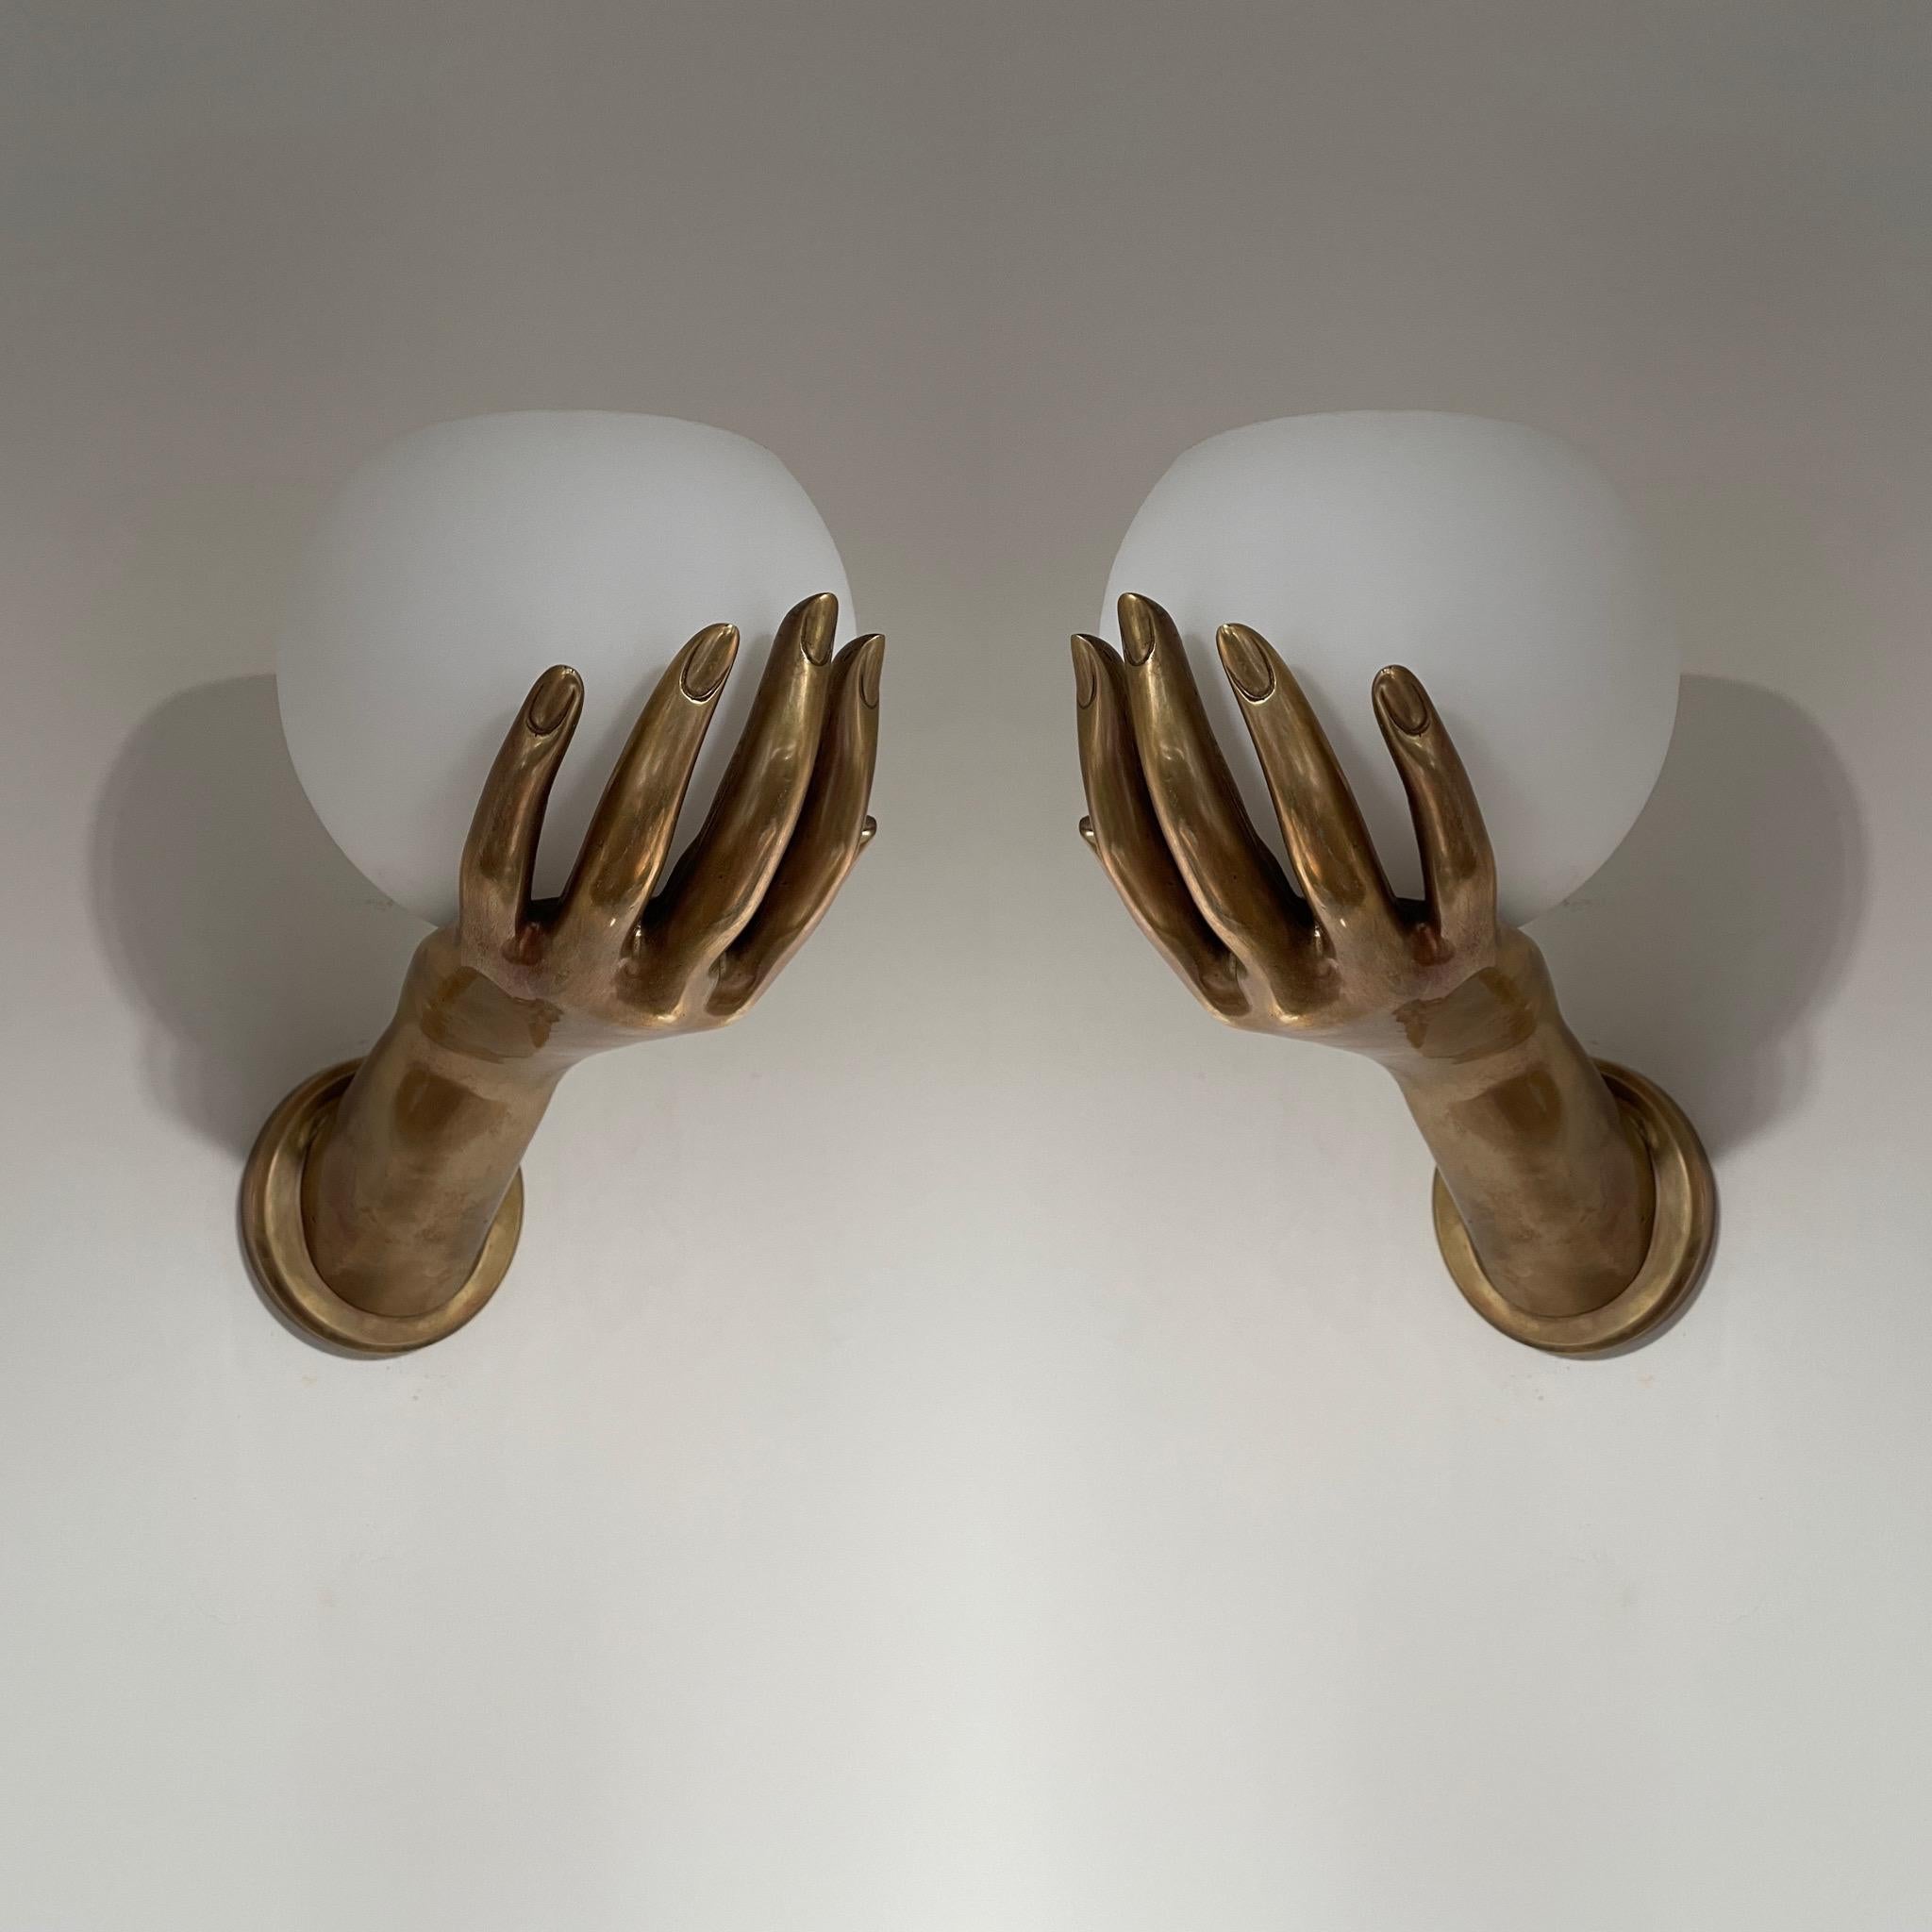 From our Studio Bucchi collection. A pair of wall lights in the form of hands holding frosted glass or opaque shades. Taken from a French mid century design, available in different finishes. Shown in antique brass. Very well cast and superb